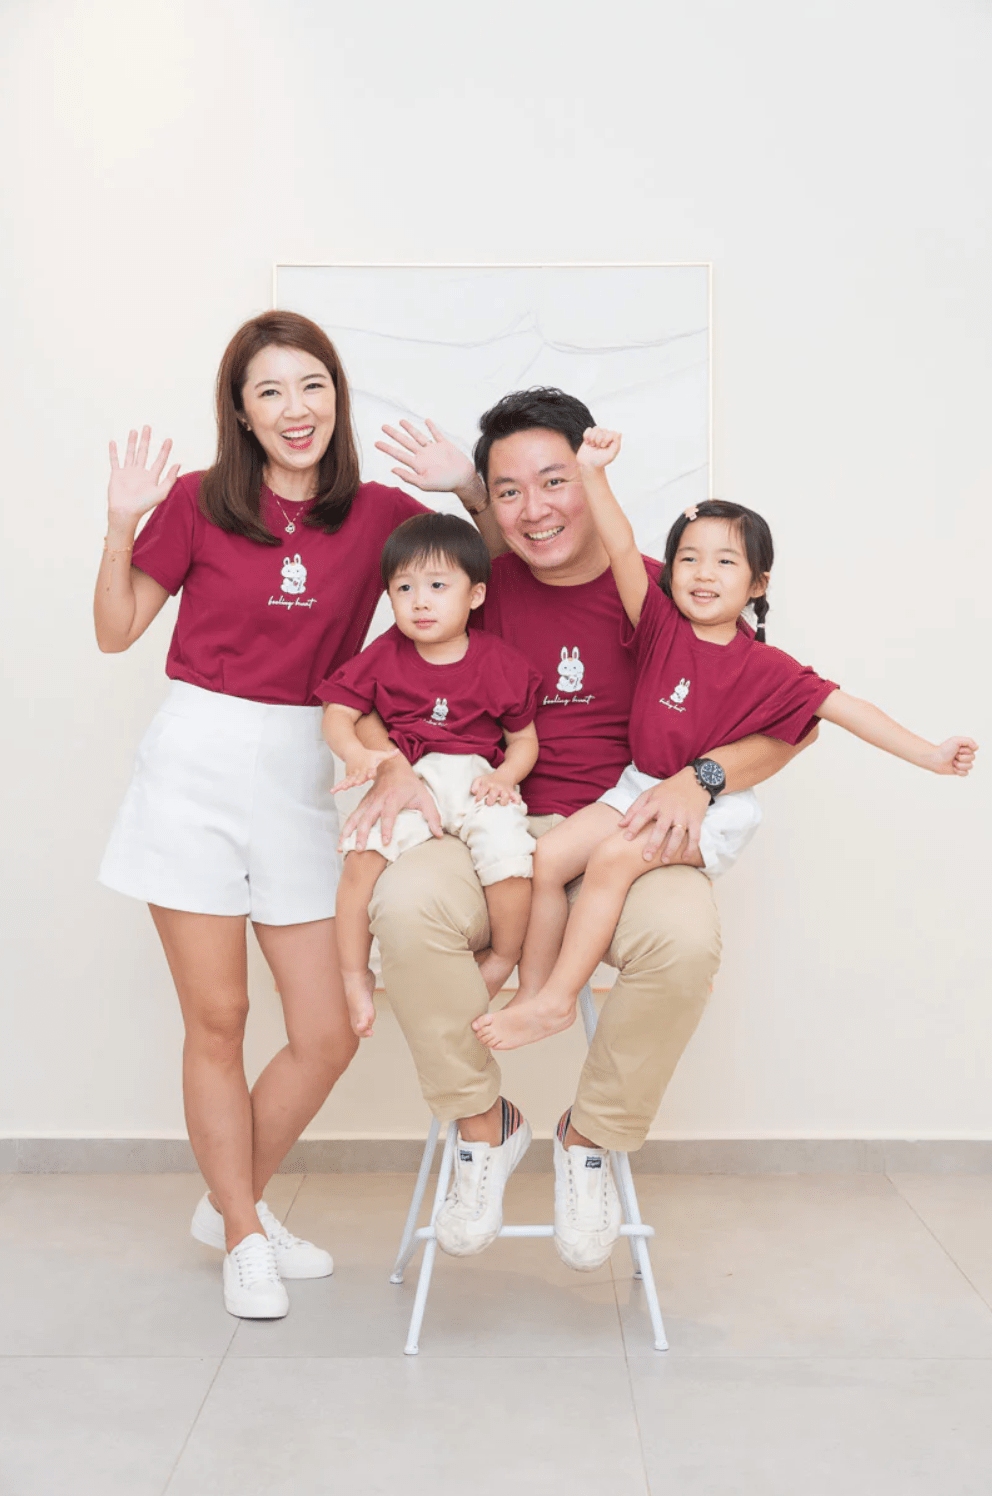 Dressed in Gabe fam tees for CNY